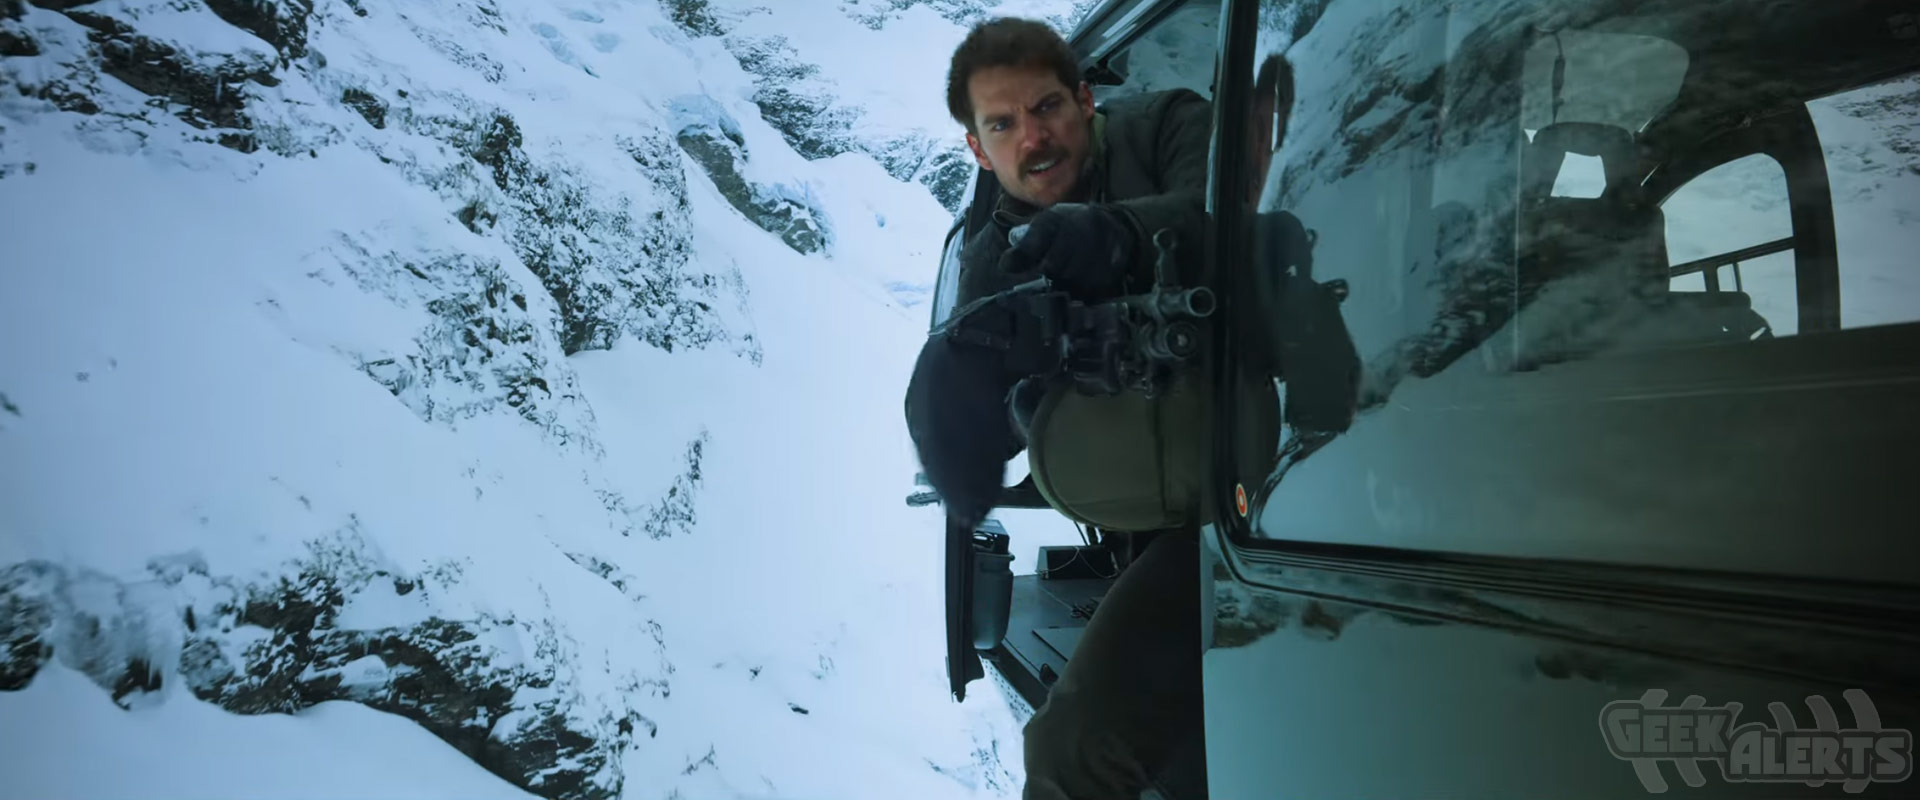 Mission: Impossible - Fallout Trailer